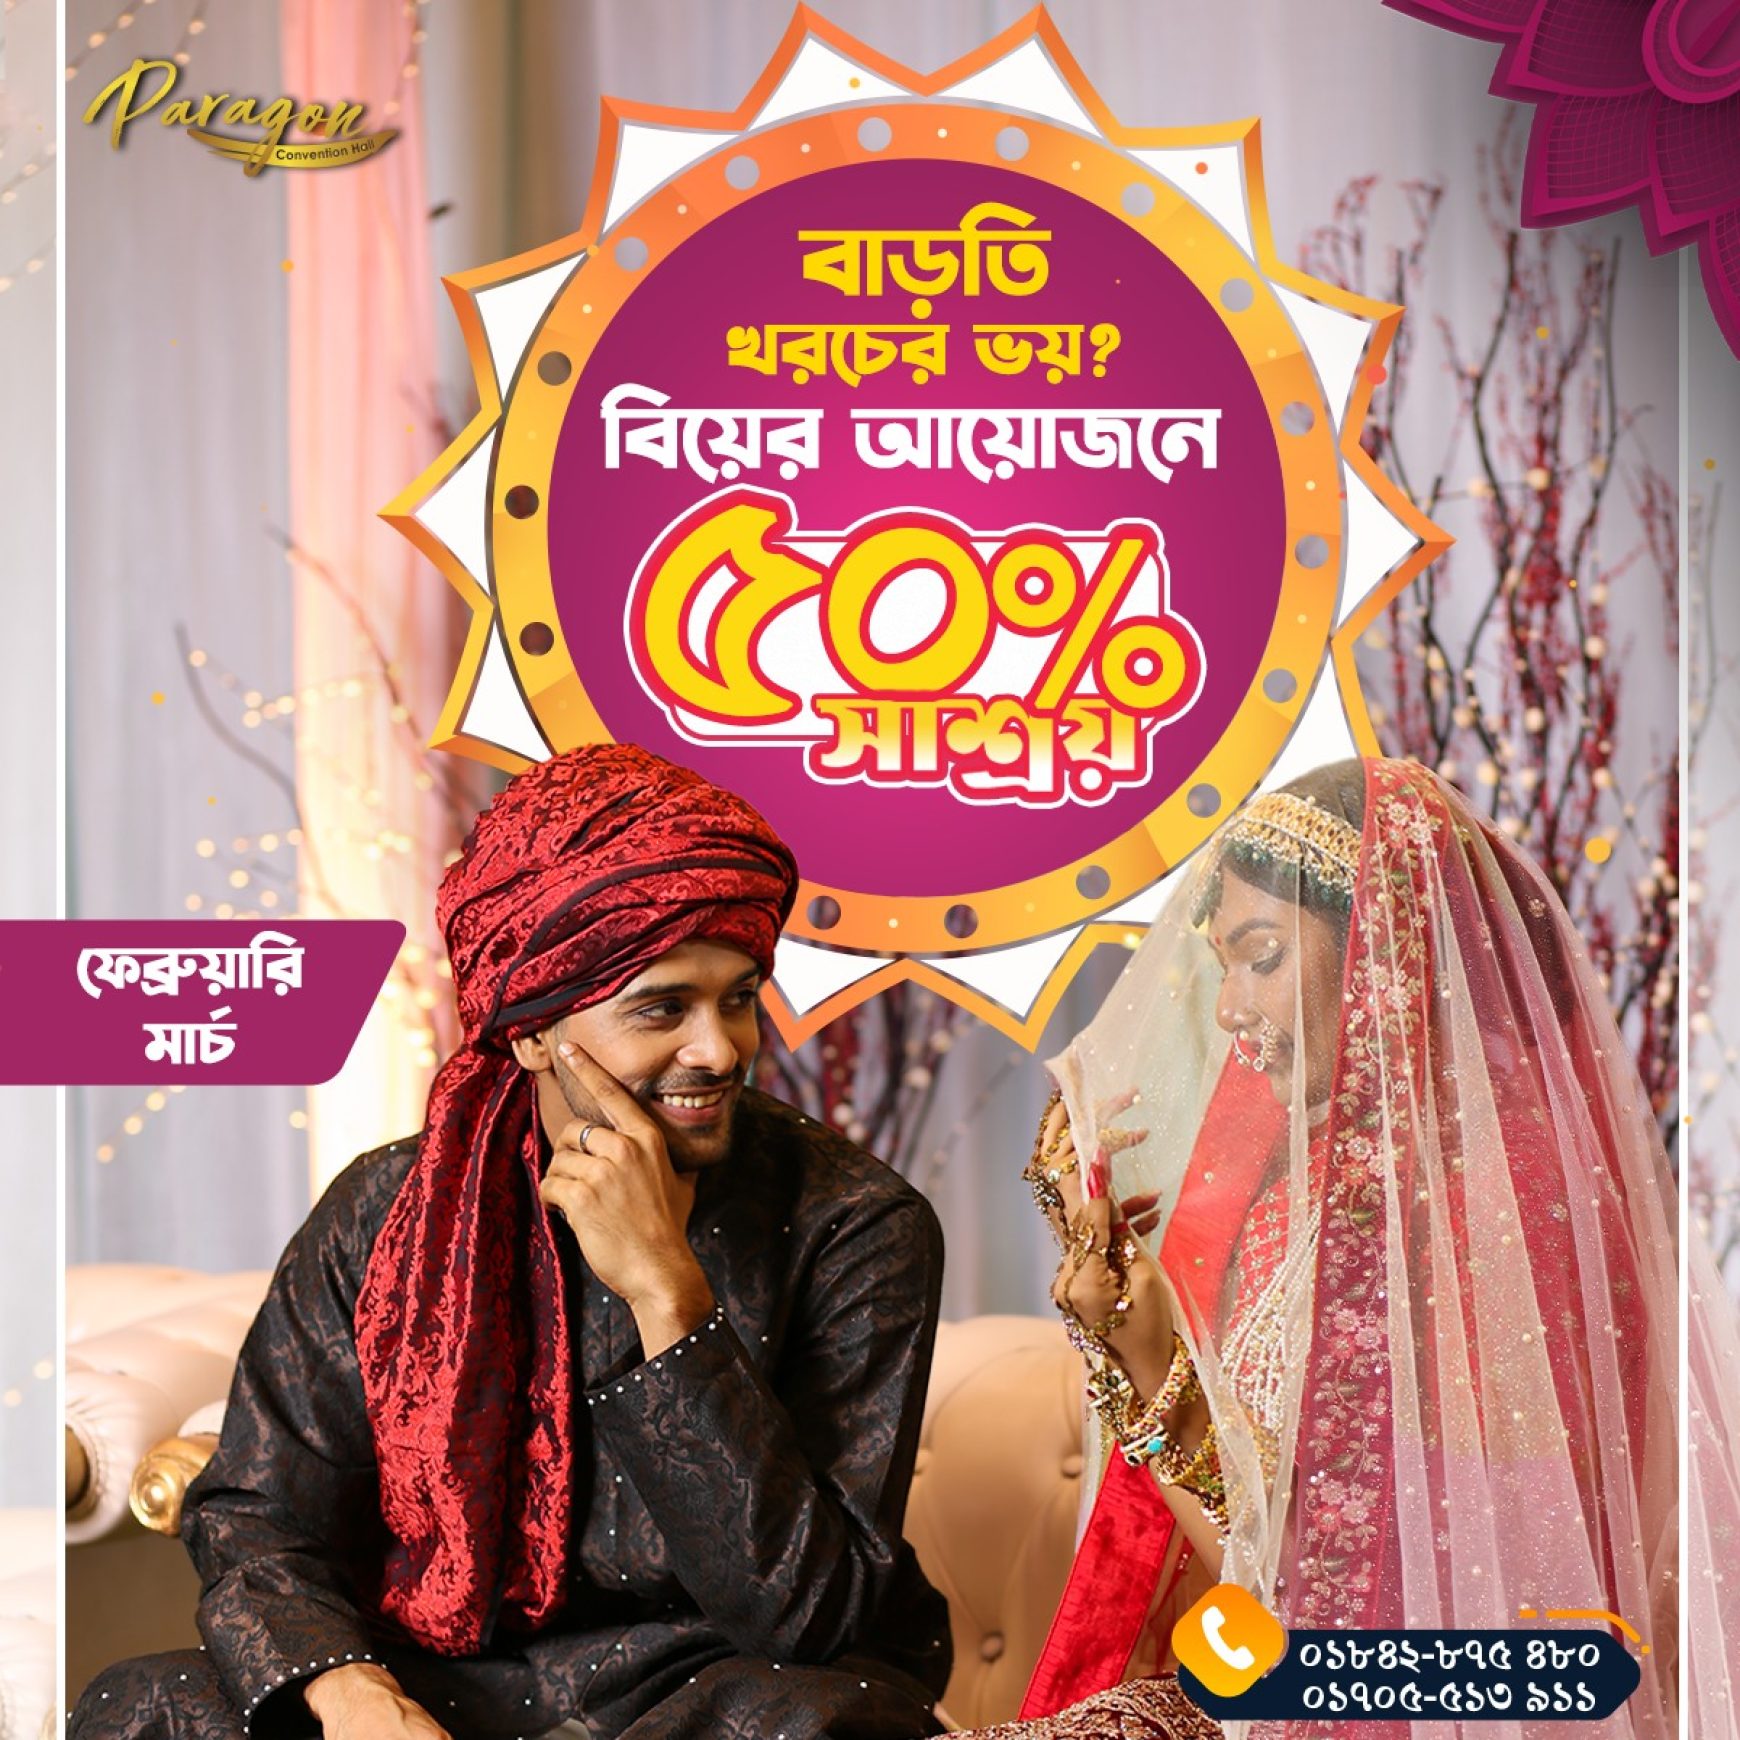 50% Offer for Hall Booking